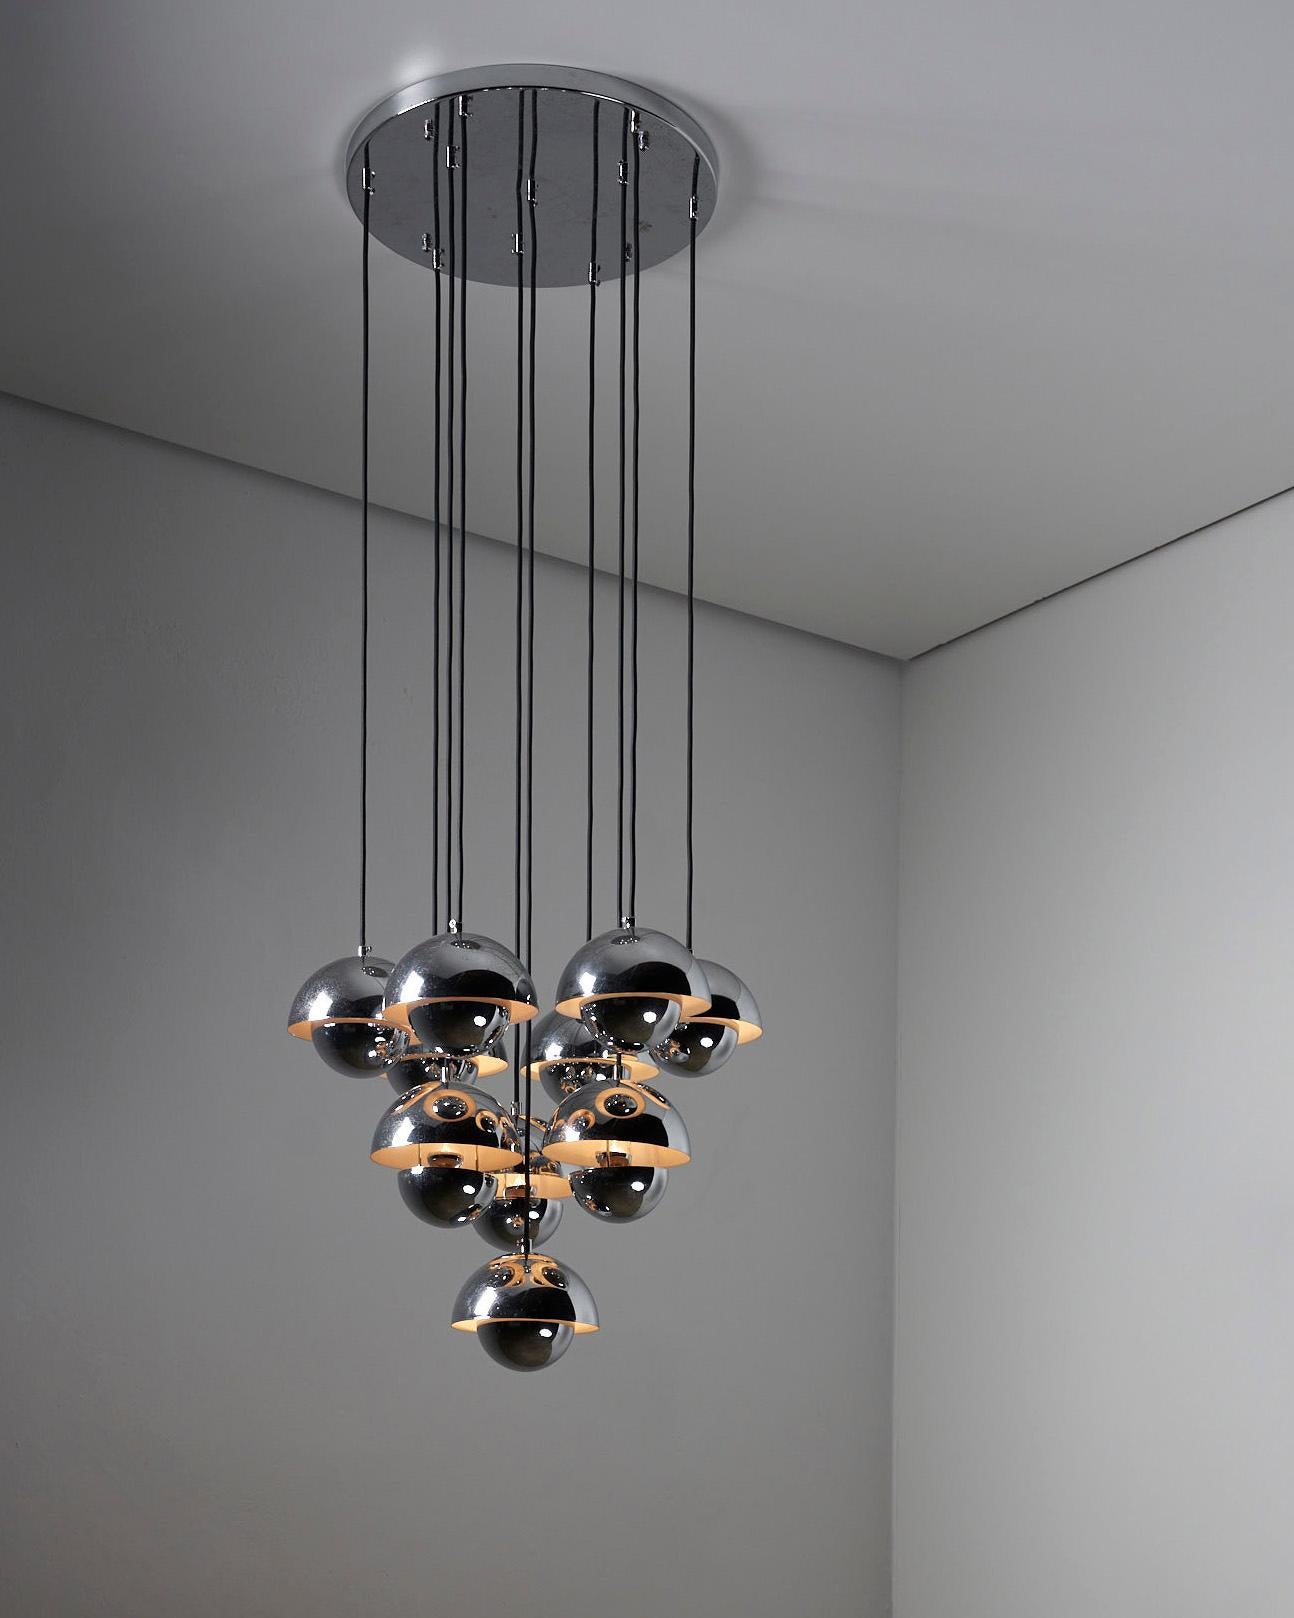 Stunning Large Chrome Flowerpot Chandelier – Inspired by Verner Panton

Elevate your space with this magnificent chrome flowerpot chandelier, reminiscent of the iconic designs by Verner Panton. The chandelier features ten flowerpot pendants,